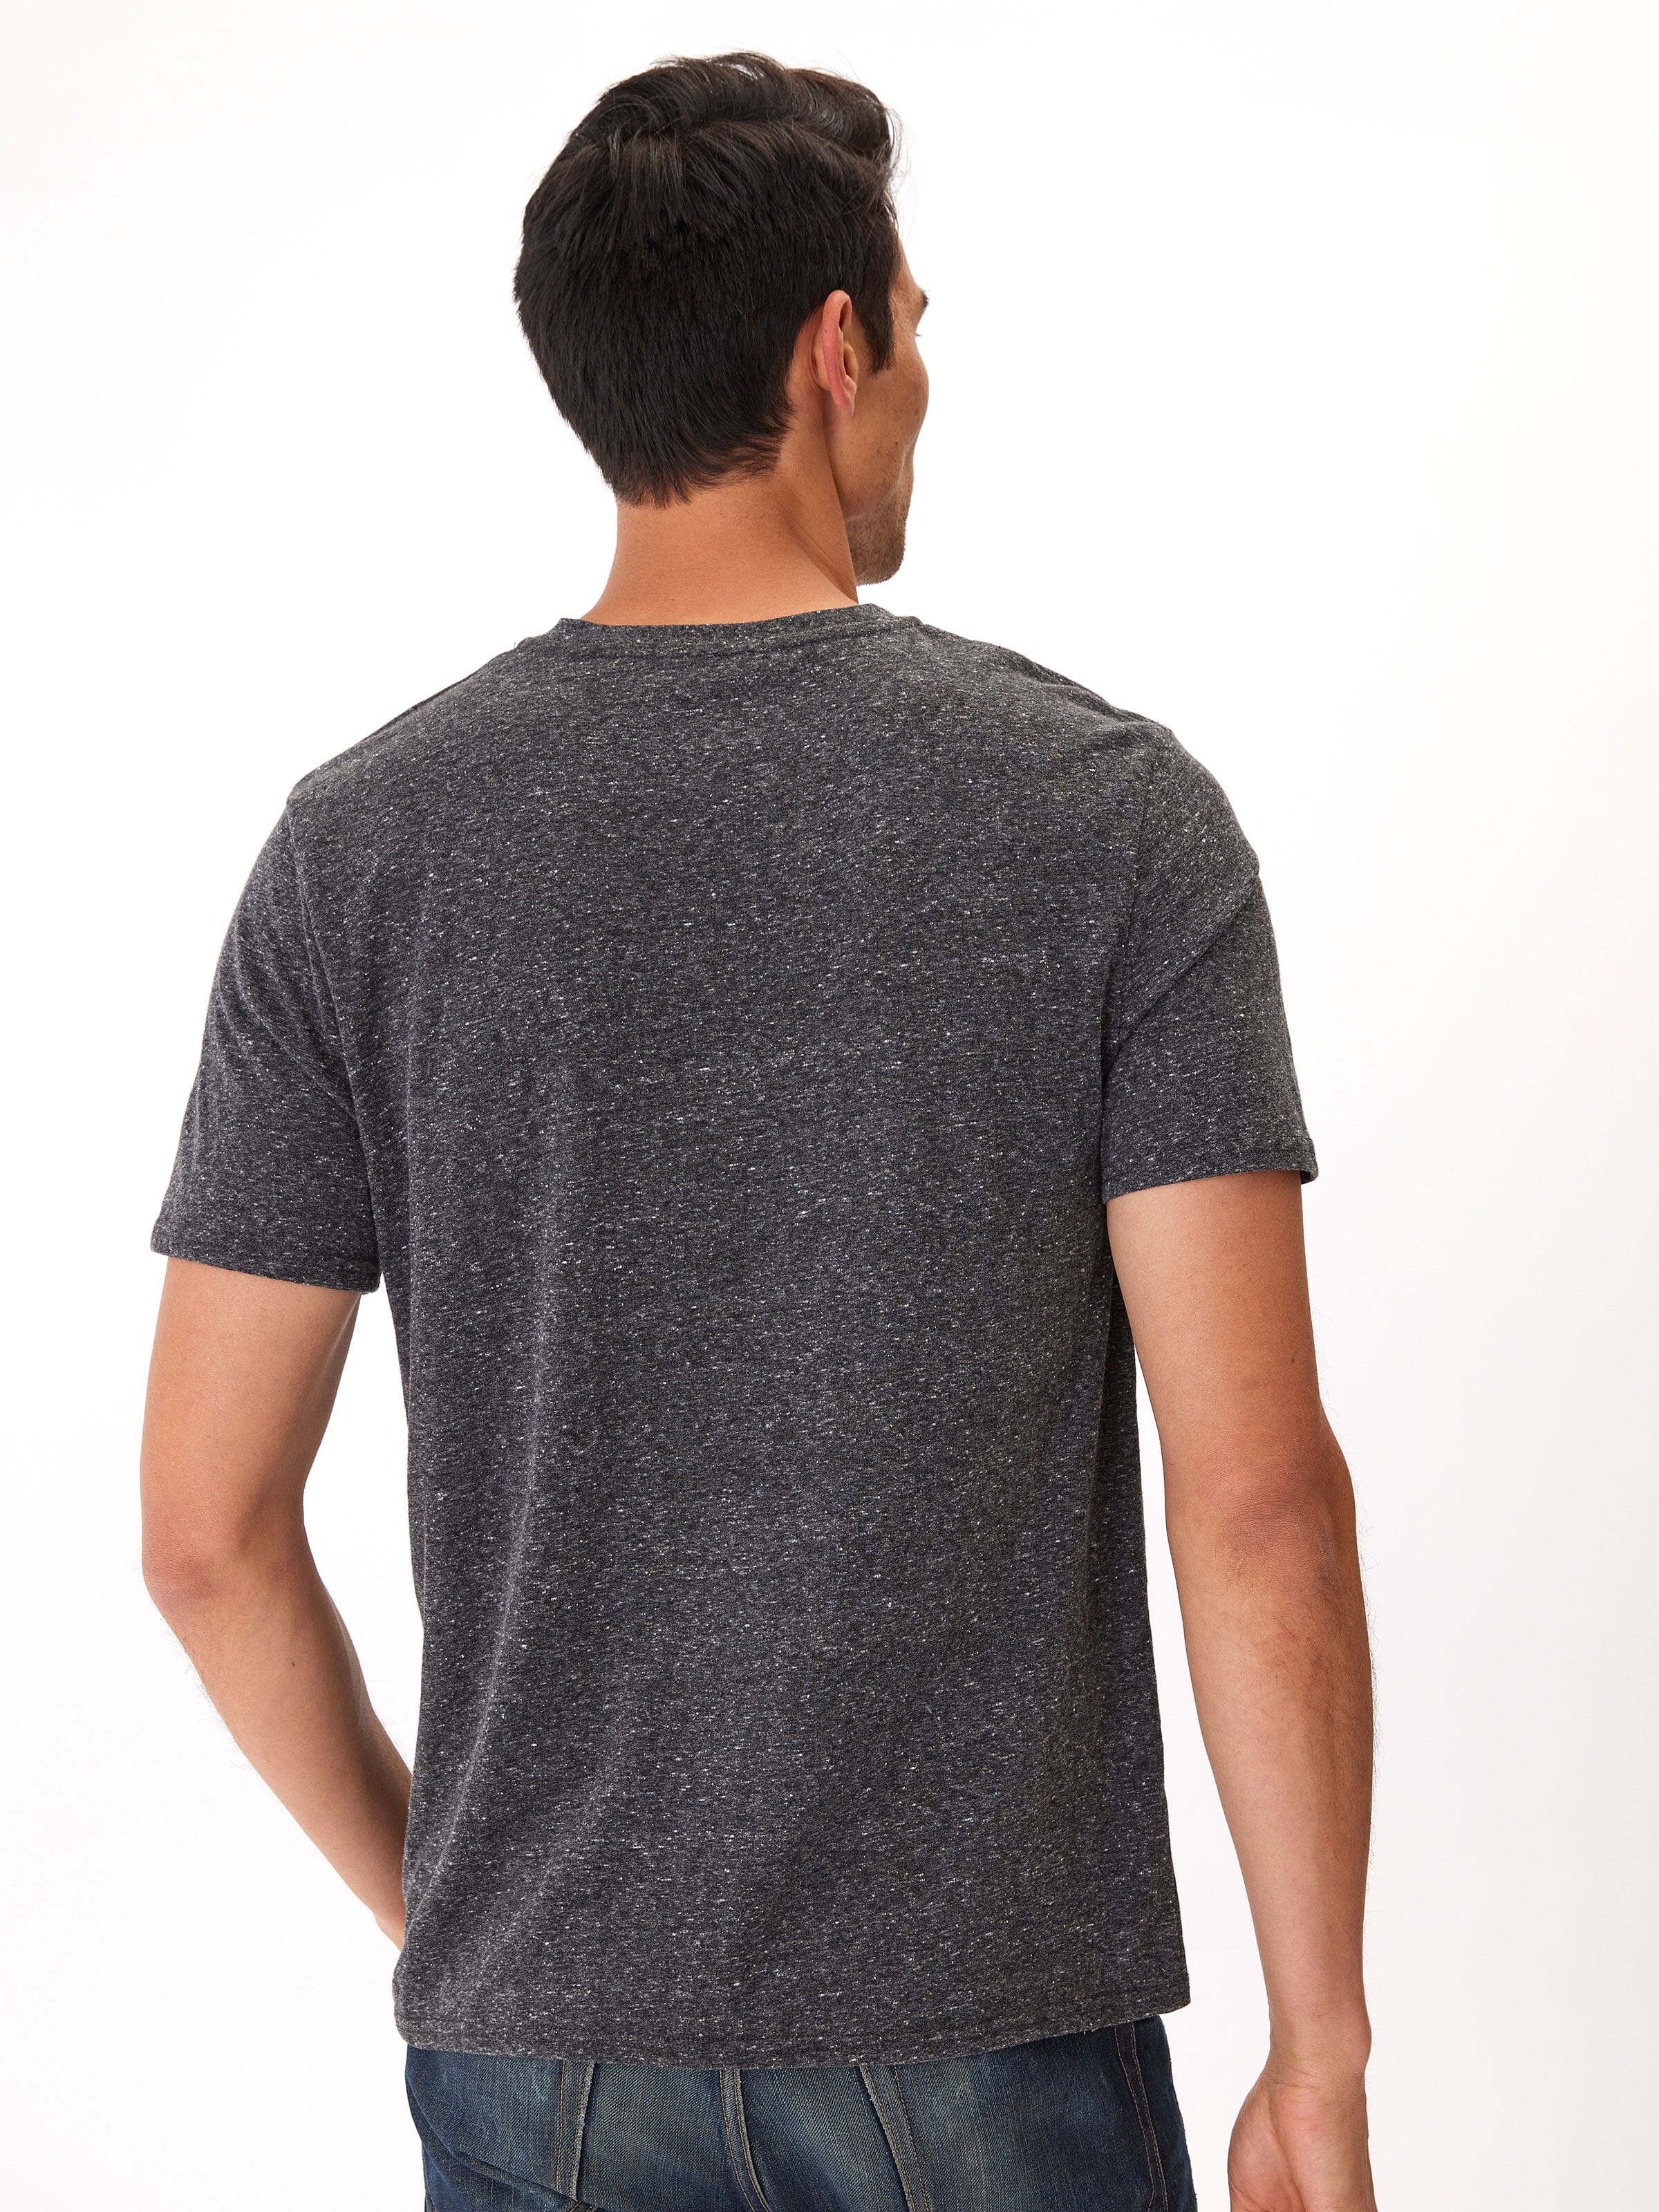 Triblend Crew Threads Thought Grey Heather – Neck Tee in 4